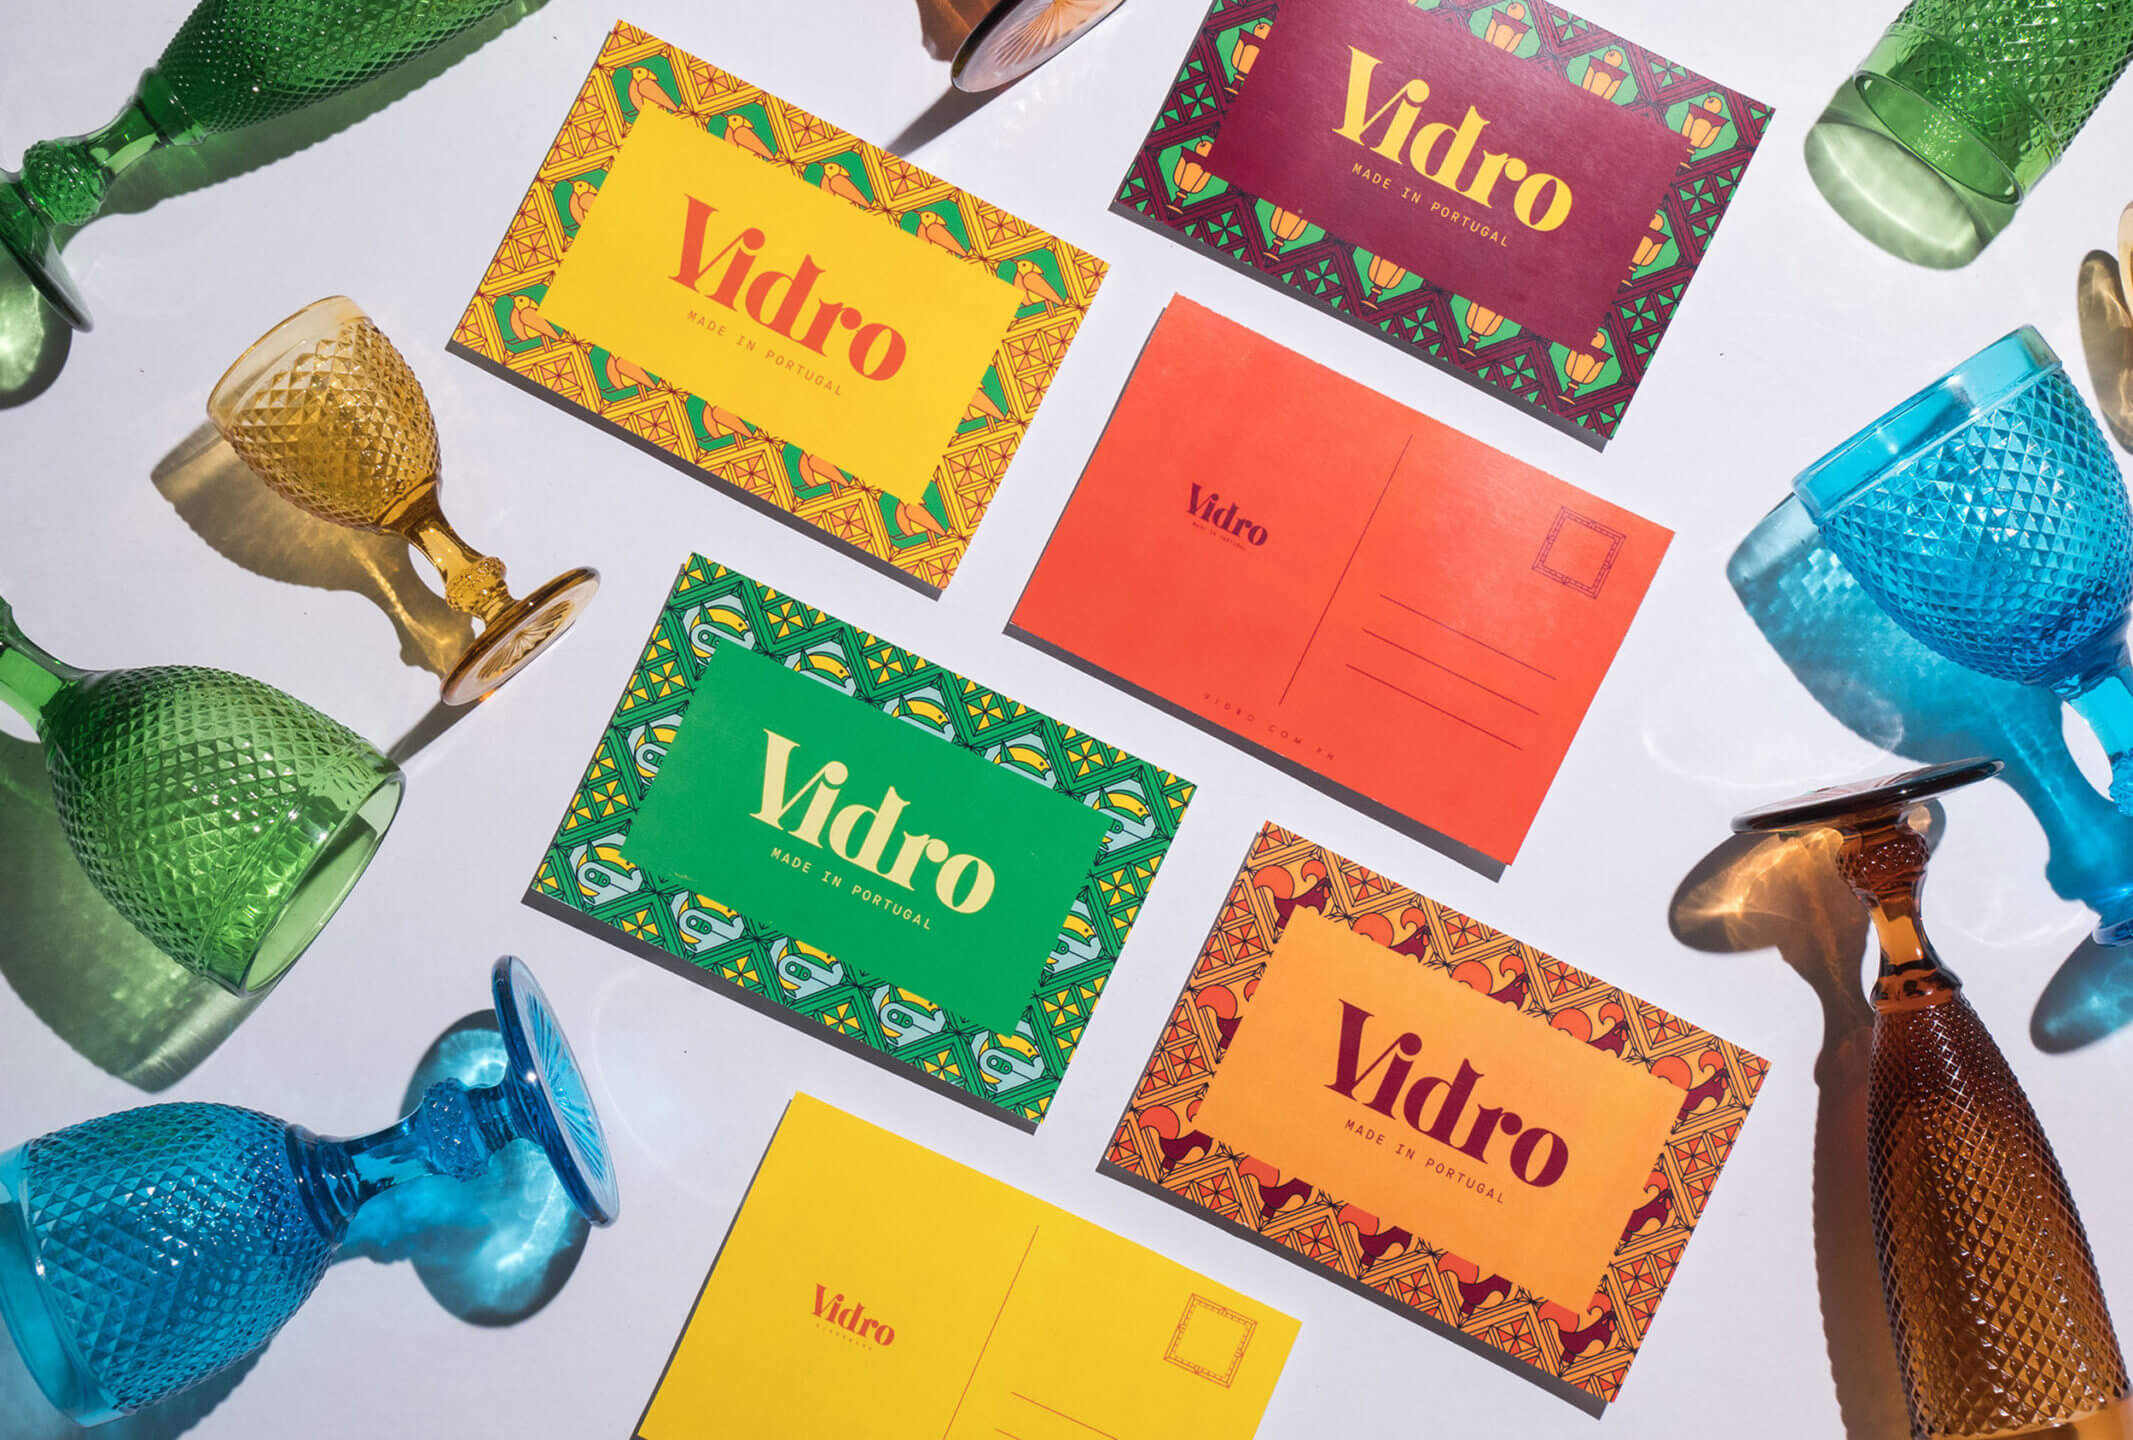 Colorful products and patterns on a postcard design for Portuguese glassware brand Vidro